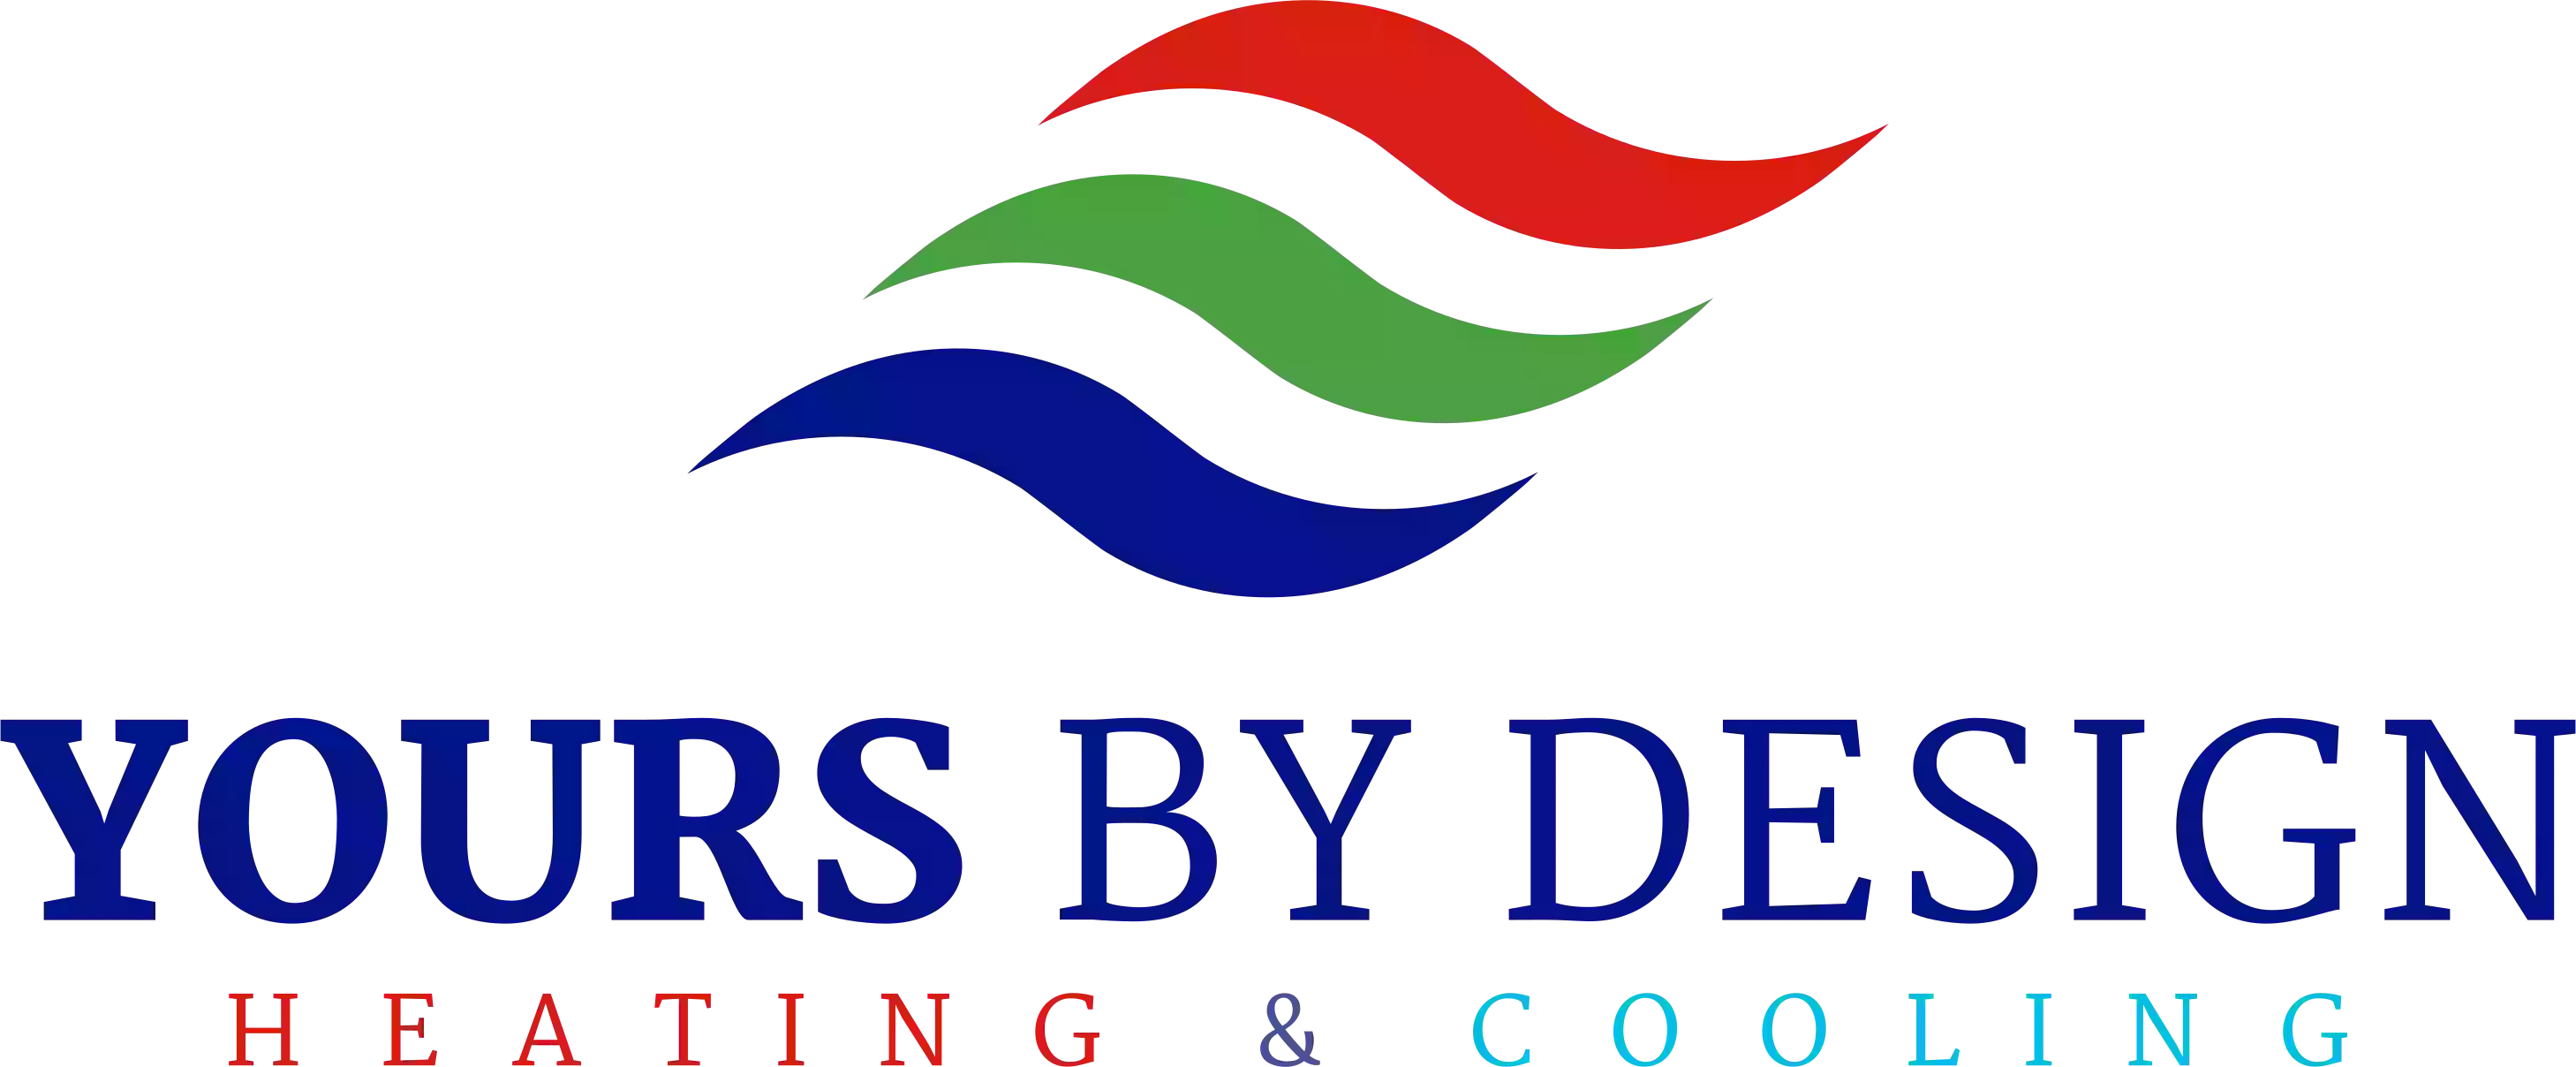 Yours By Design Heating & Cooling, Inc.